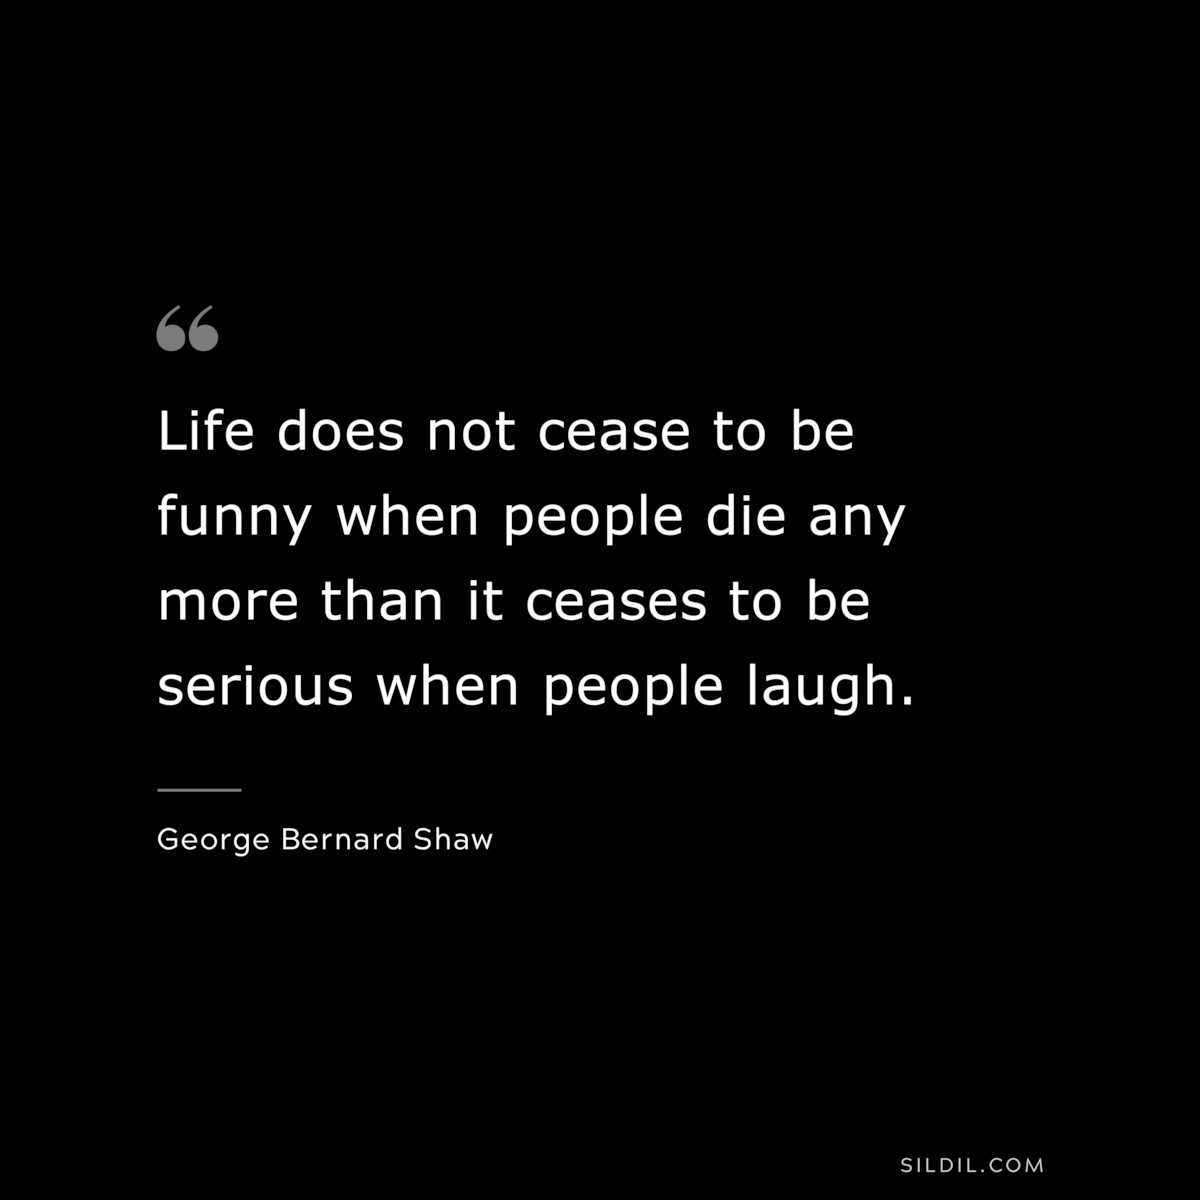 Life does not cease to be funny when people die any more than it ceases to be serious when people laugh. ― George Bernard Shaw